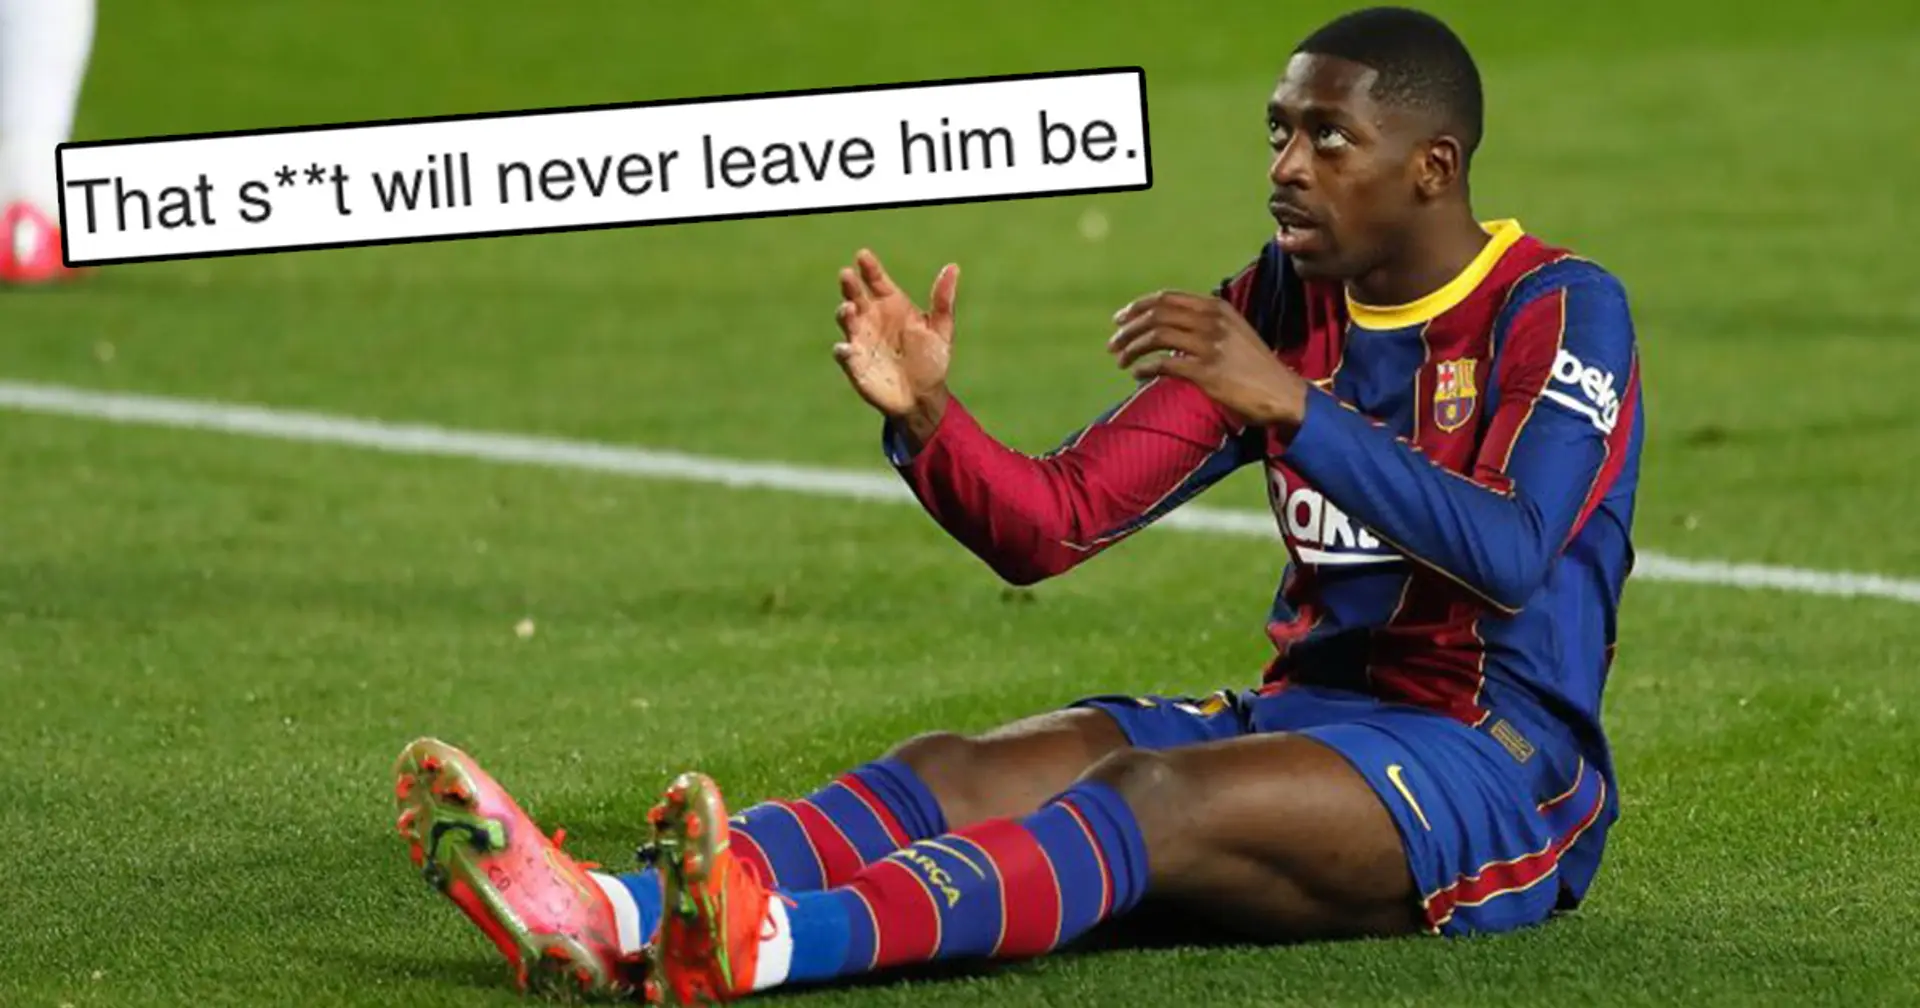 'I'm the biggest Ousmane backer here but I give up': Barca fans react to Dembele injury